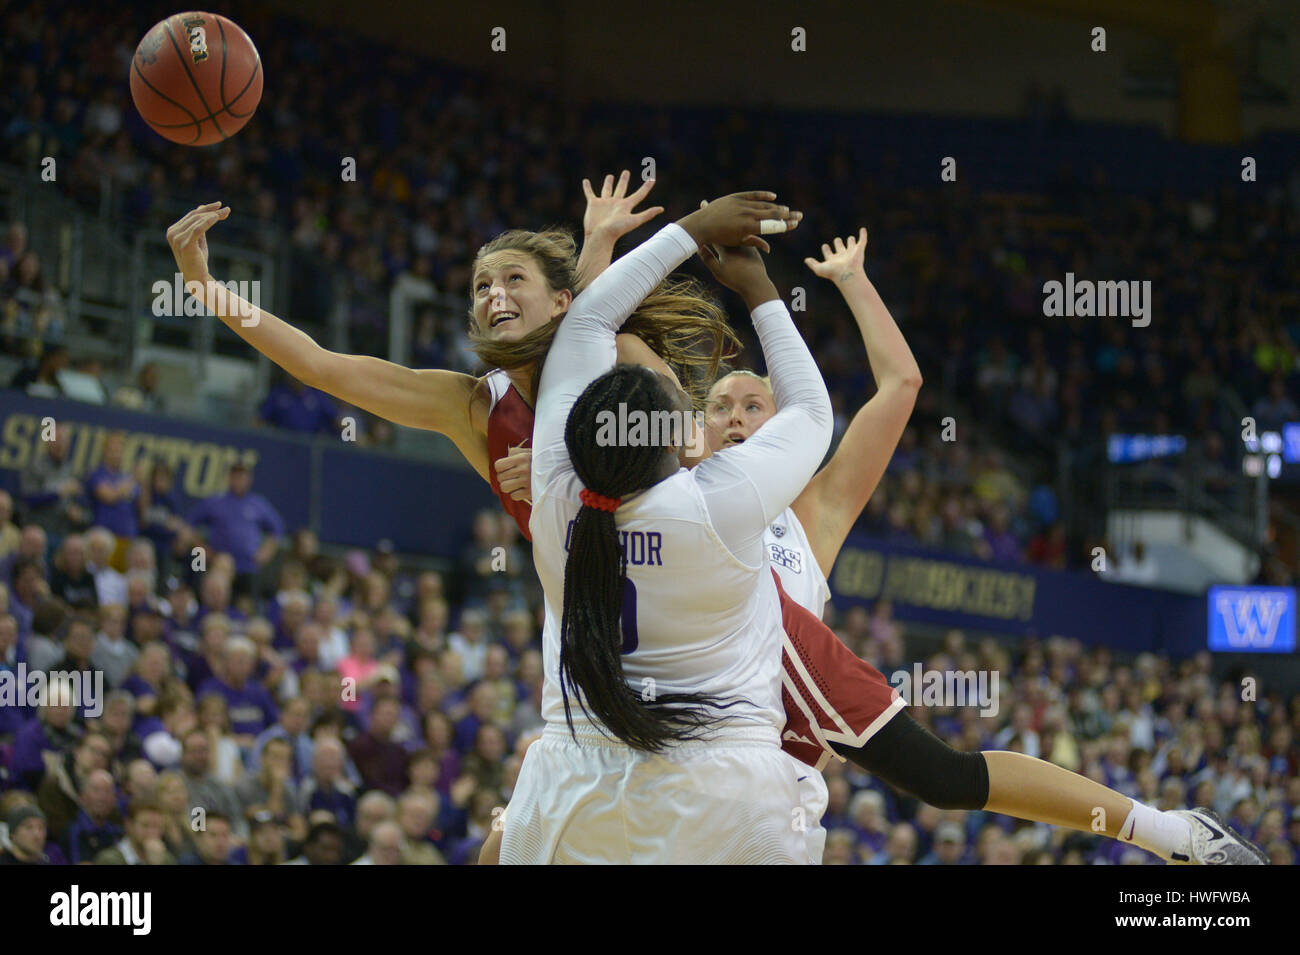 Seattle, WA, USA. 20th Mar, 2017. Oklahoma's Maddie Manning (23) drives to the basket against UW center Chantel Osahor (0) during a NCAA second round women's game between the Oklahoma Sooners and the Washington Huskies. The game was played at Hec Ed Pavilion on the University of Washington campus in Seattle, WA. Jeff Halstead/CSM/Alamy Live News Stock Photo